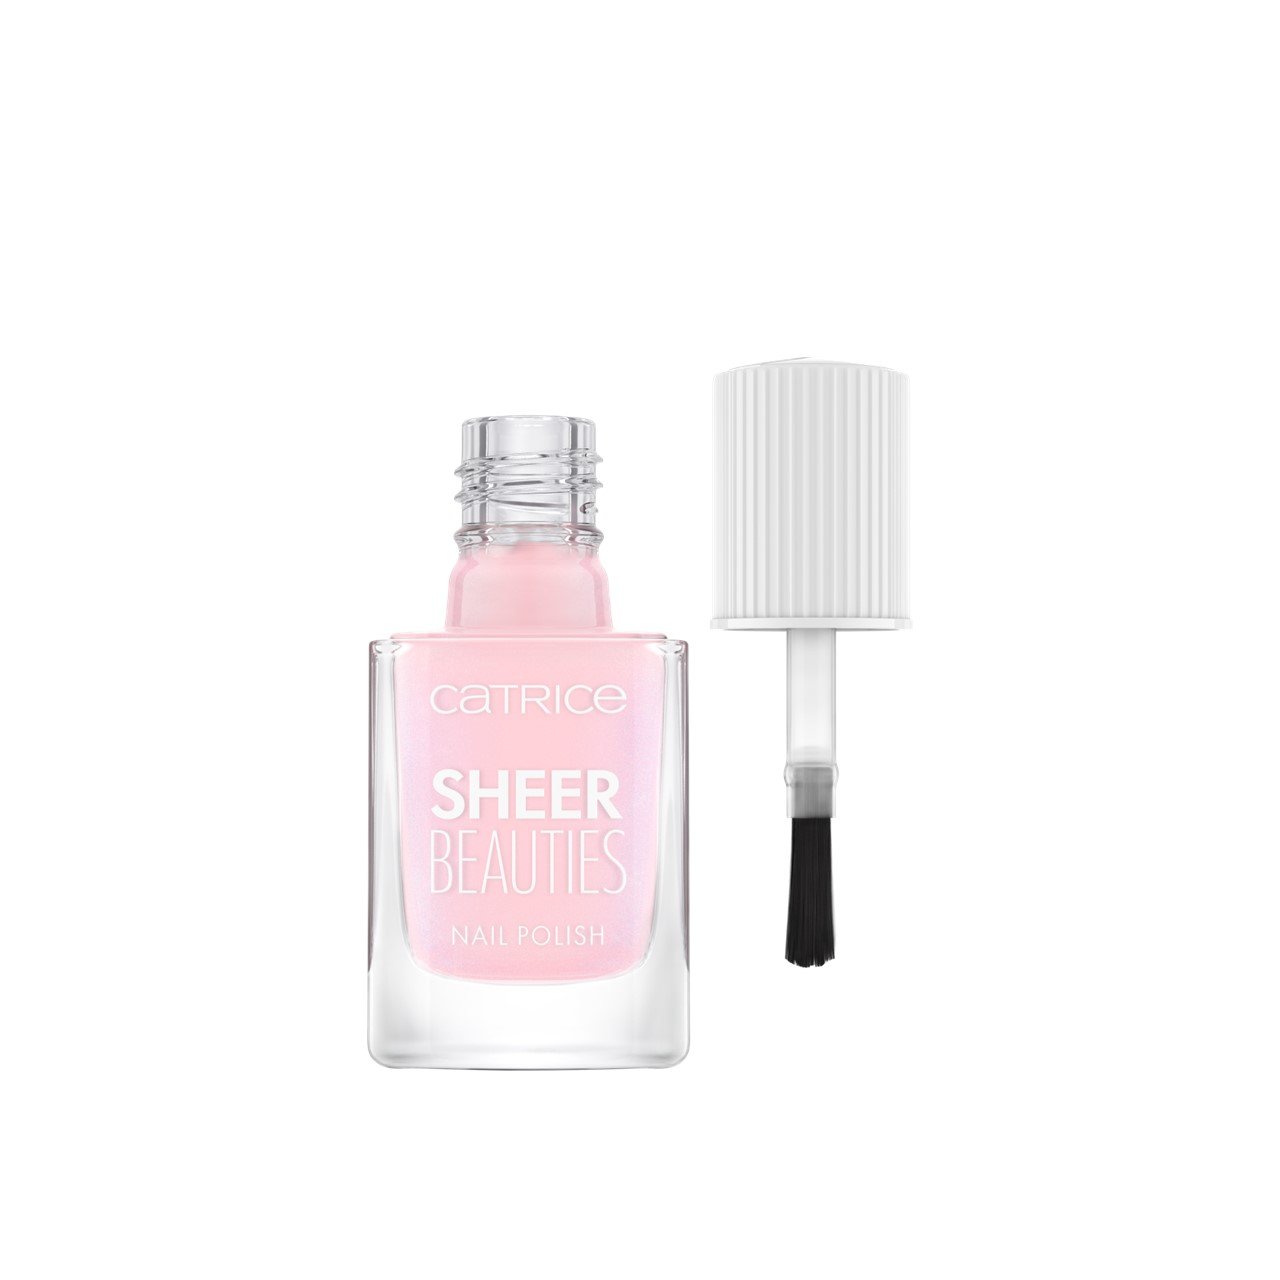 Catrice Sheer Beauties Nail Polish 040 Fluffy Cotton Candy 10.5ml